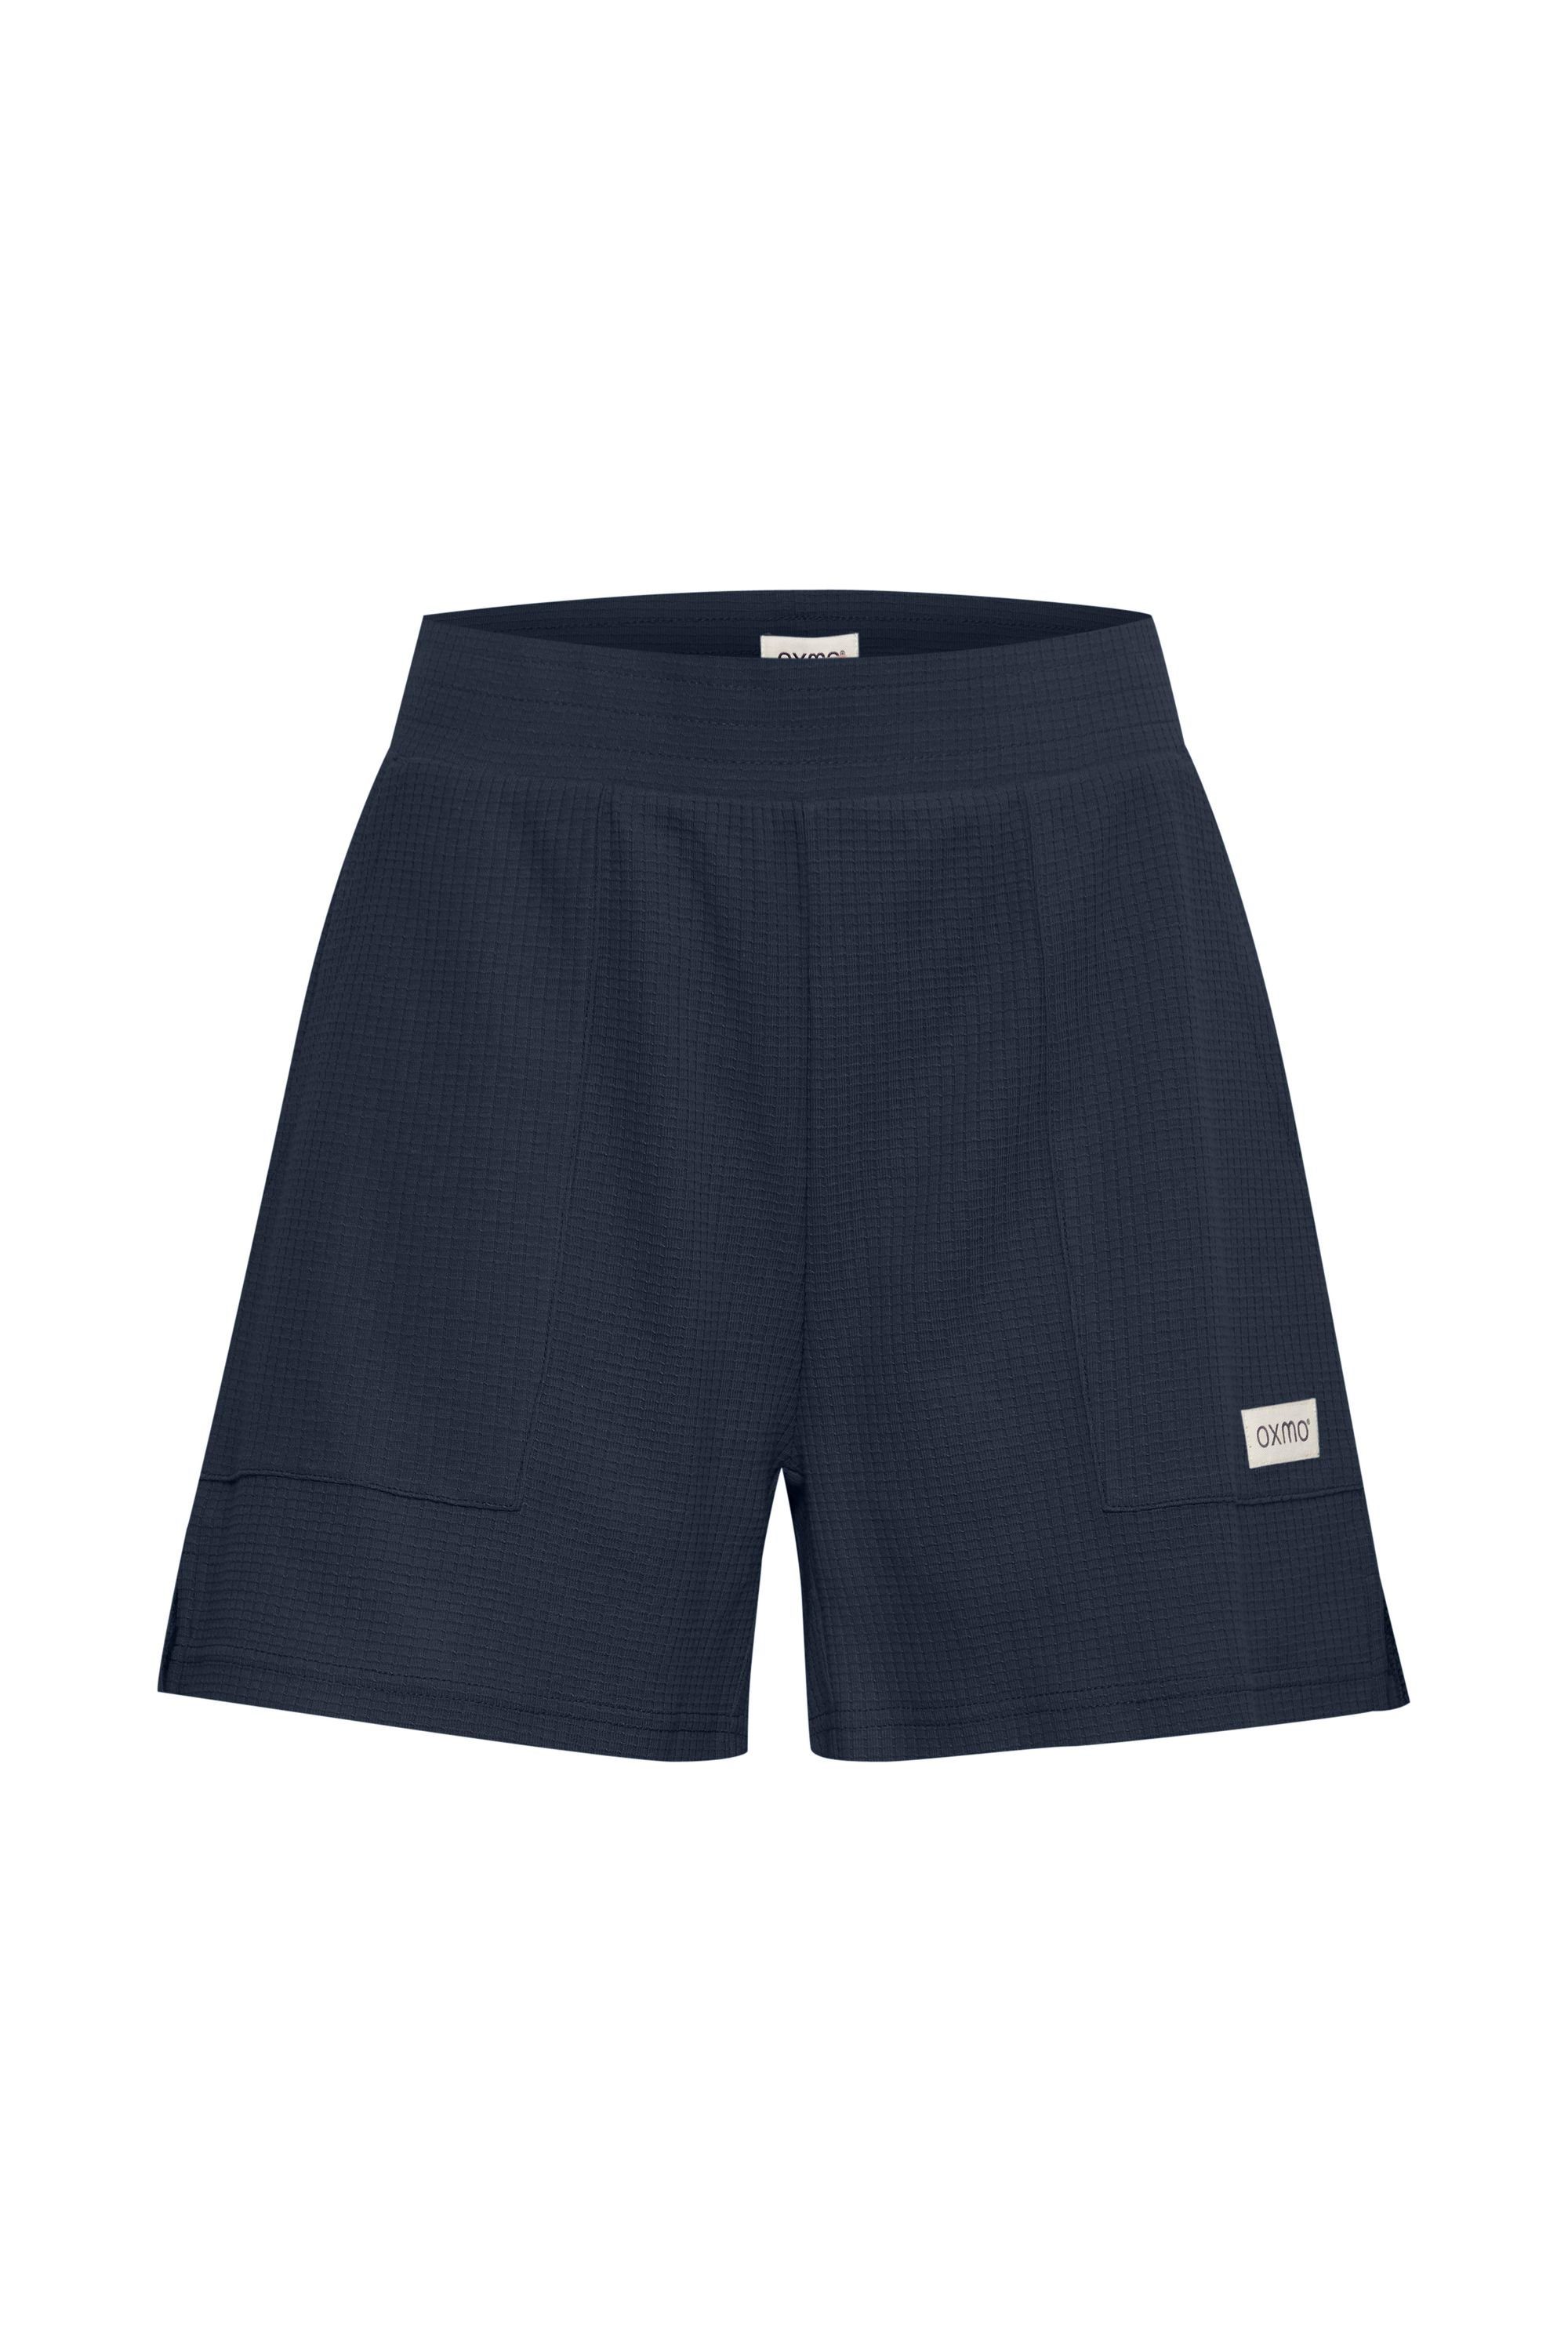 OXMO Eclipse Wim (194010) Shorts Total